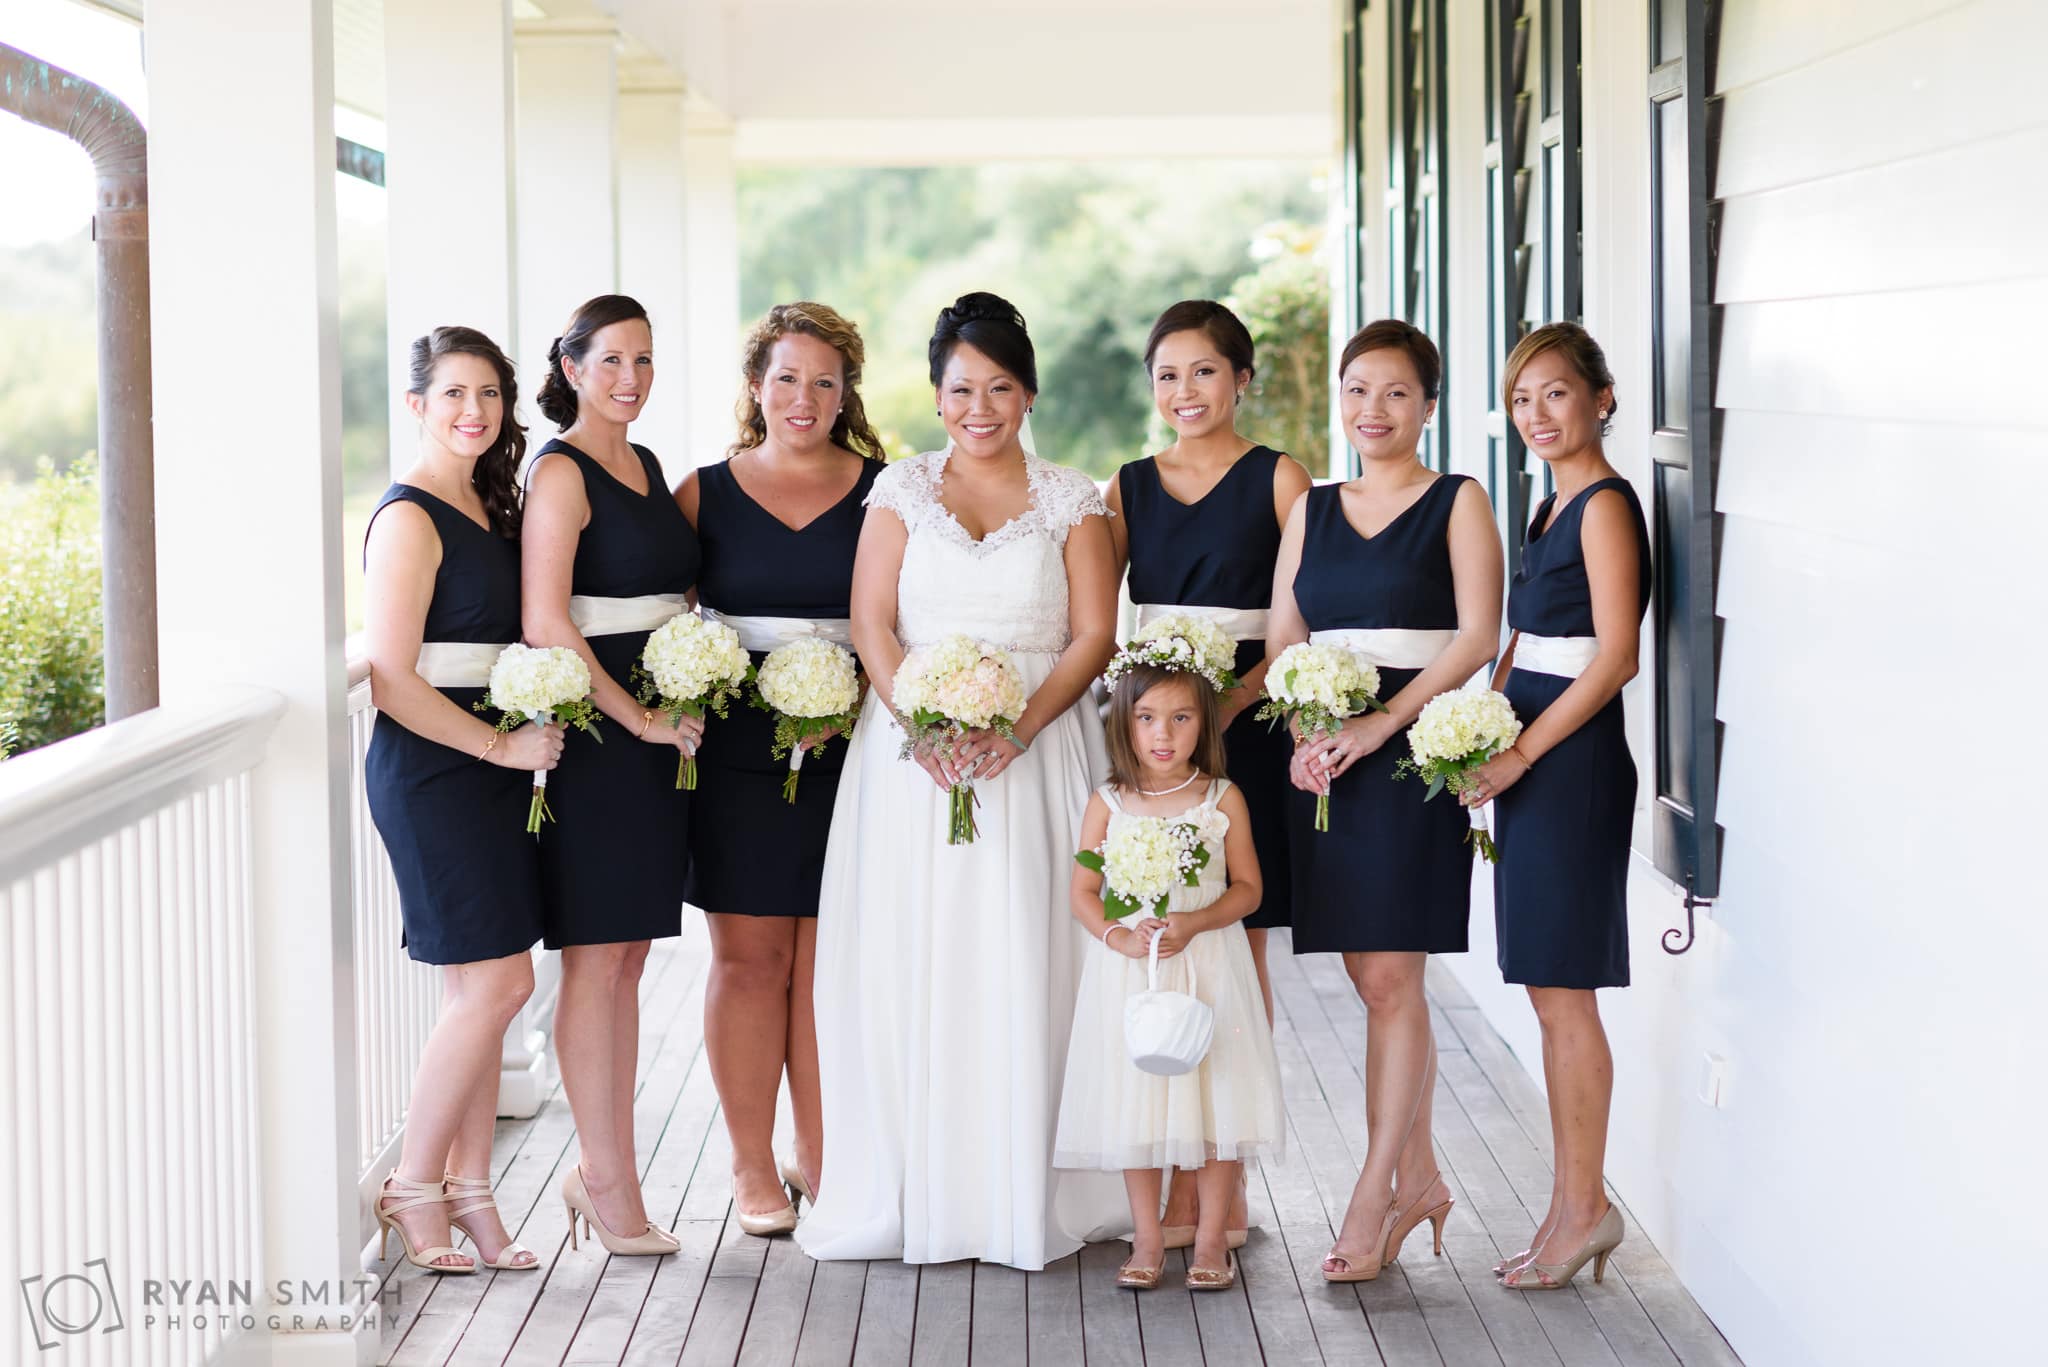 Portraits with the bridesmaids before the ceremony - Dye Club at Barefoot Resort